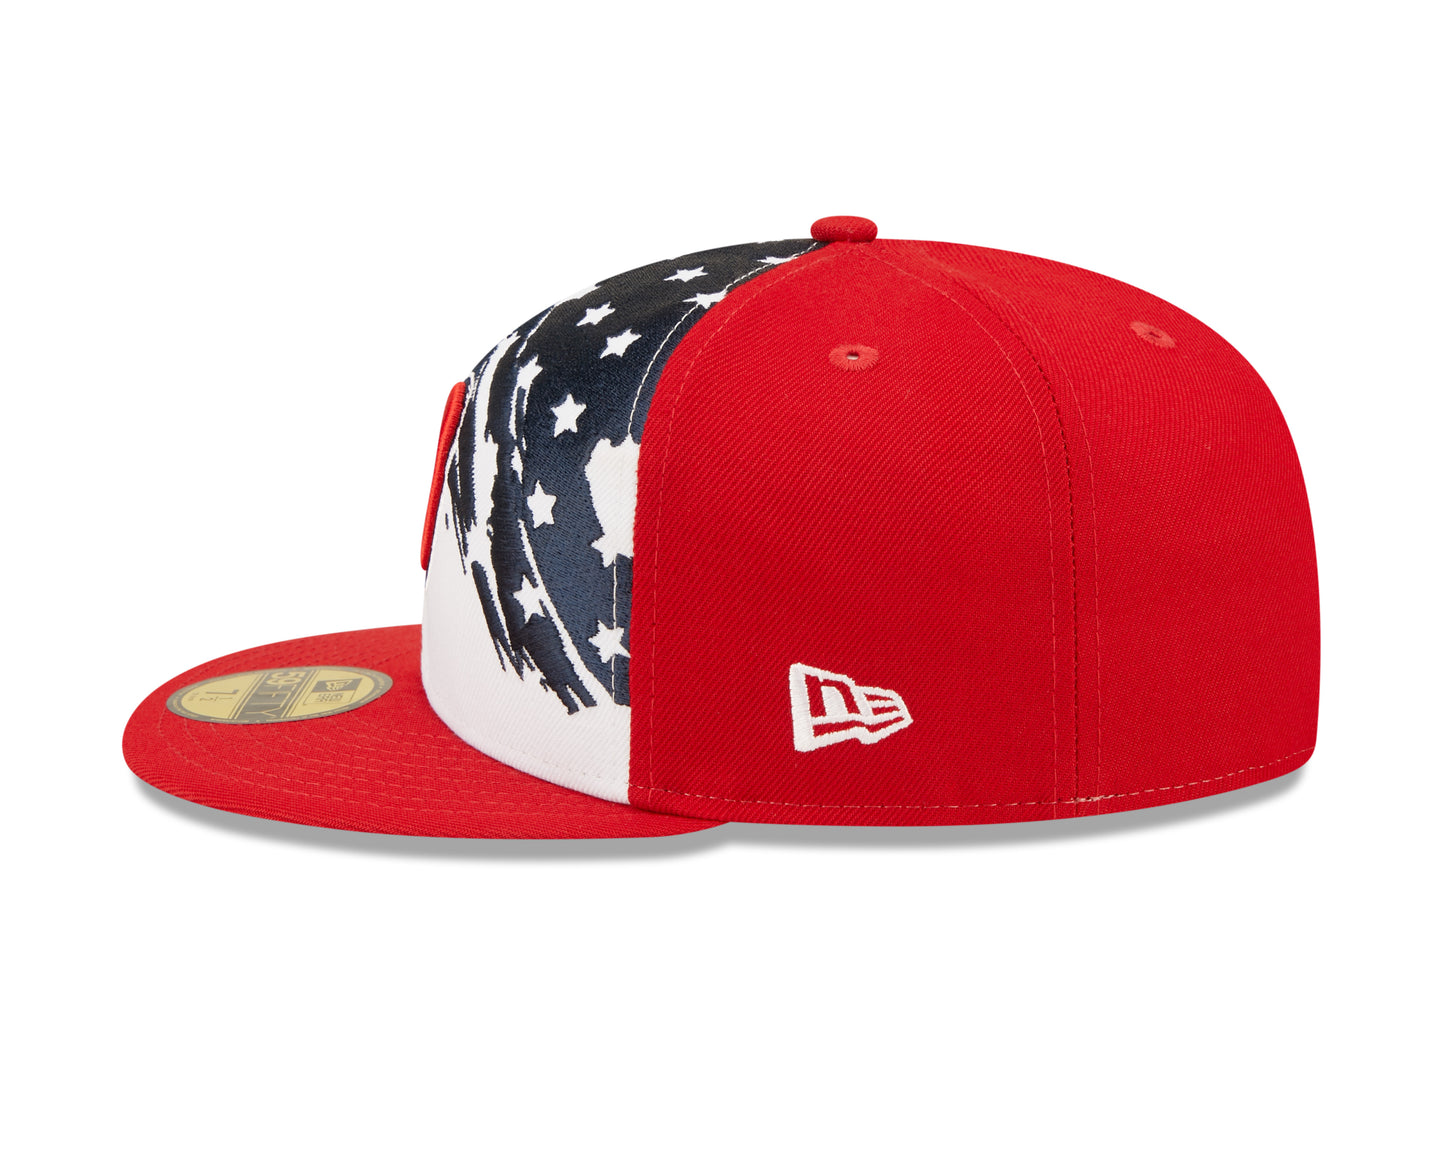 Washington Nationals Stars and Stripes July 4th 59fifty Fitted Hats